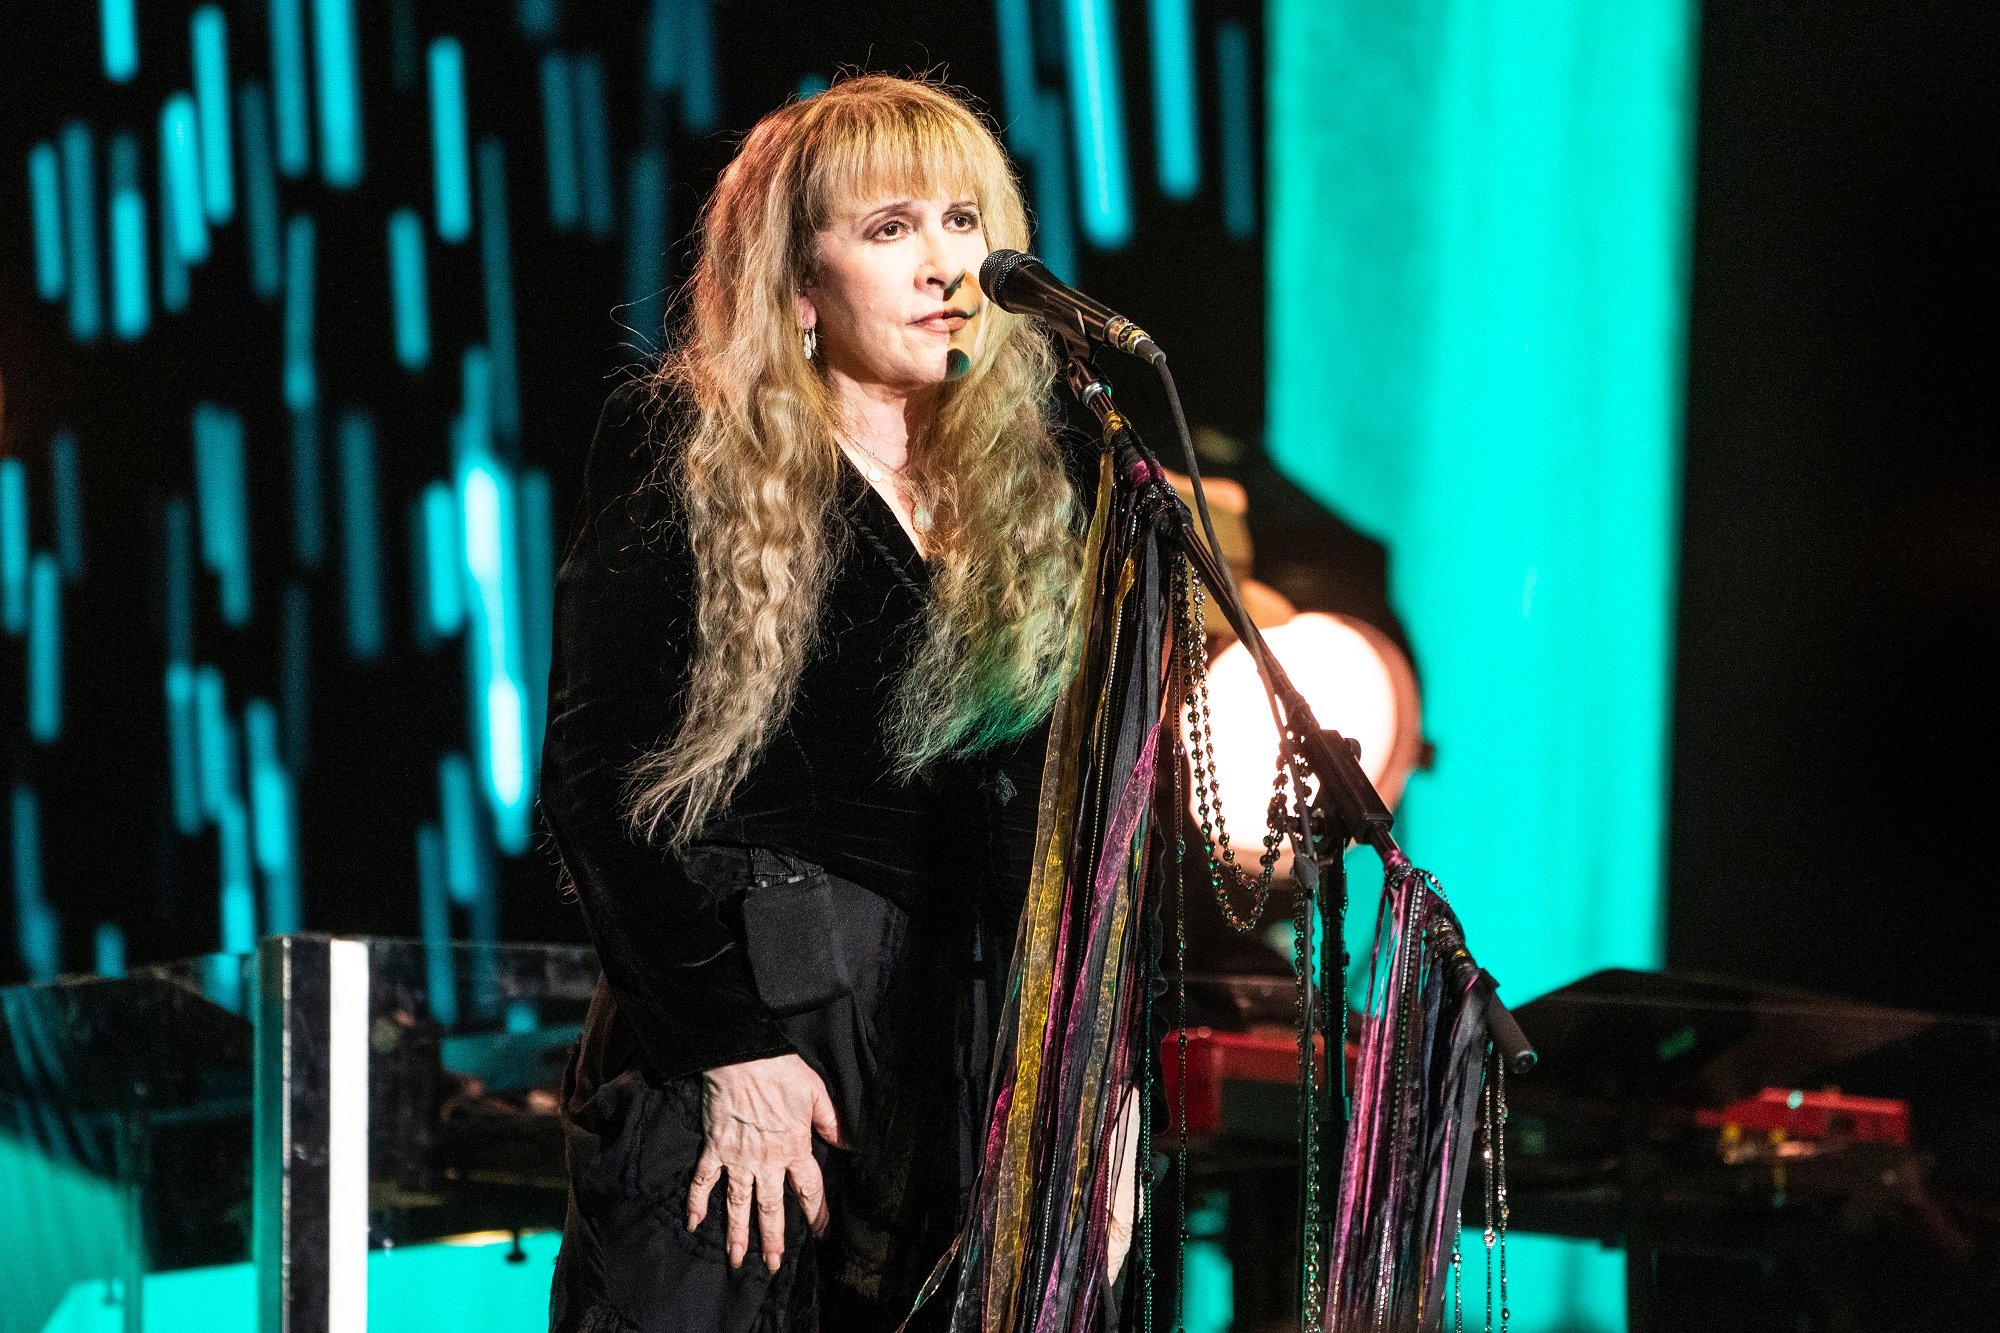 The ‘Wild Heart’ Song Stevie Nicks Made About Friend Robin Snyder’s Death